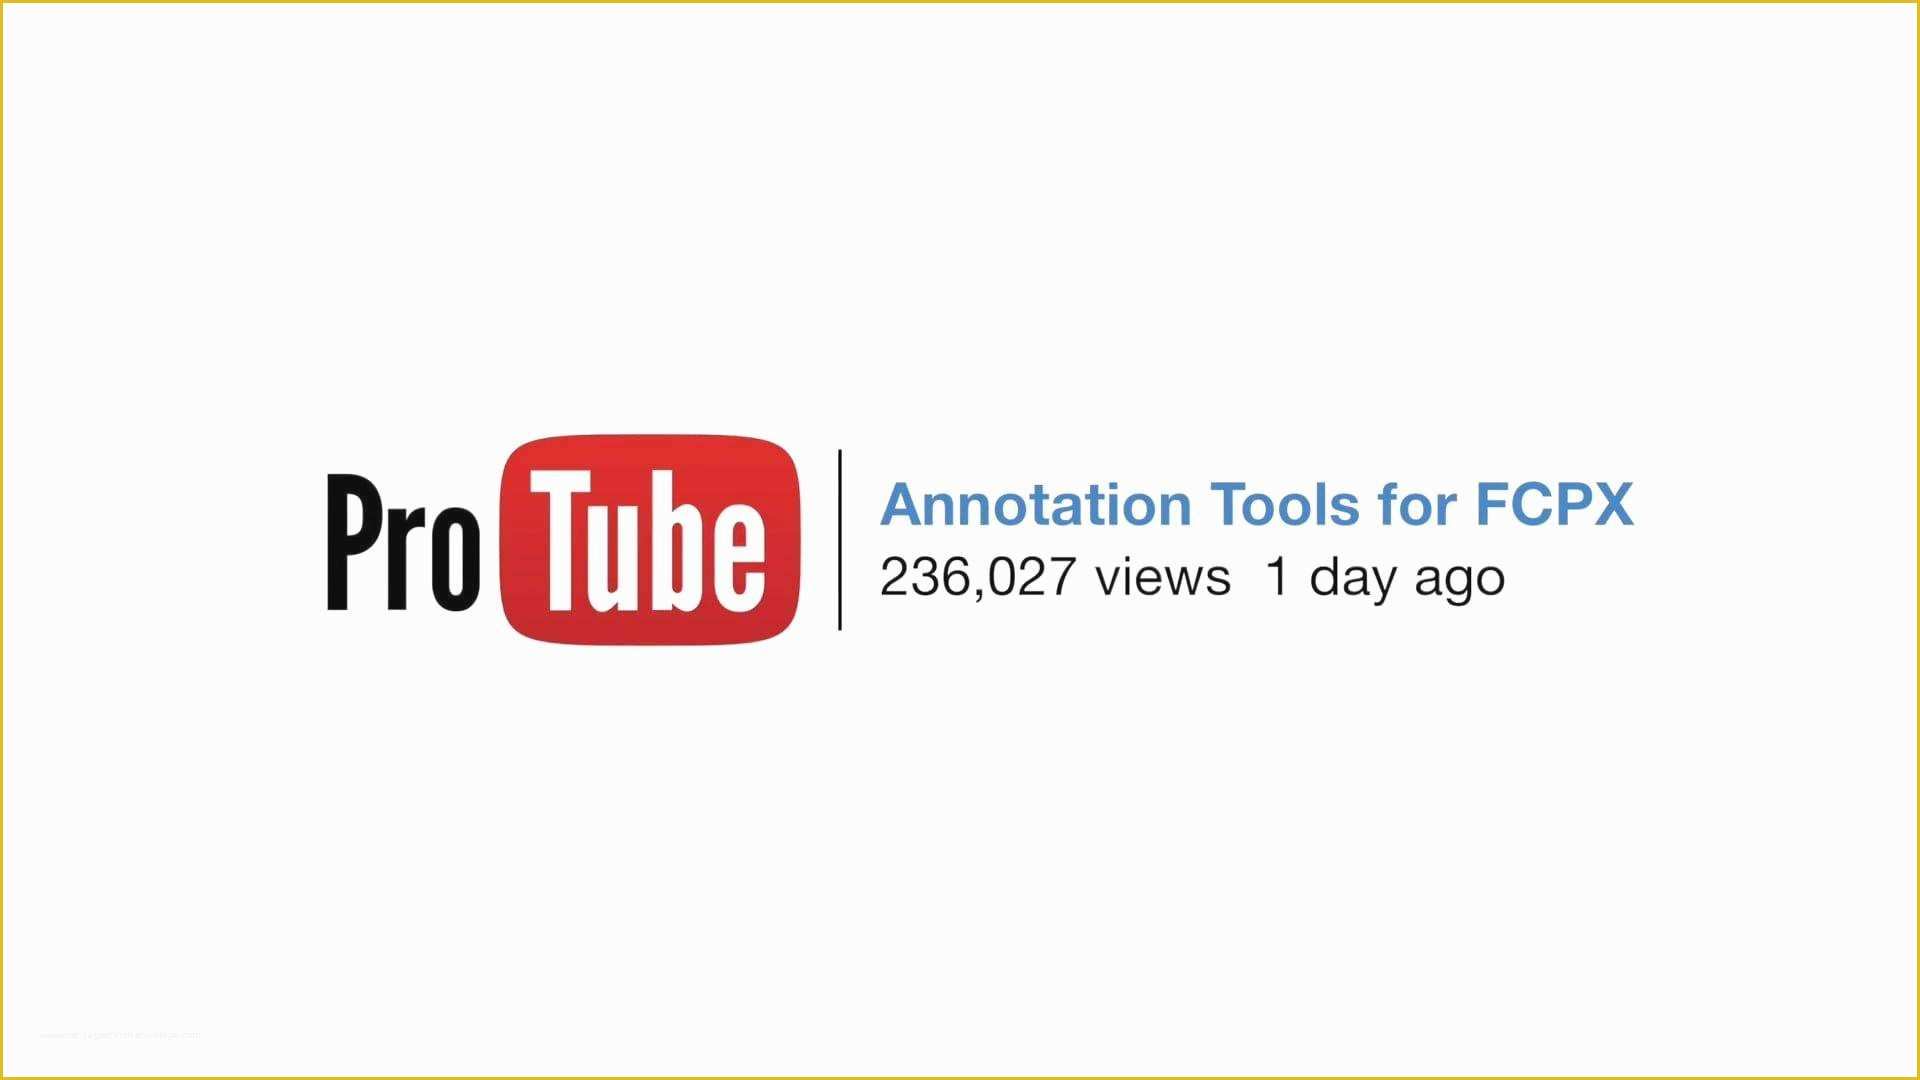 Free Final Cut Pro Templates Of Awesome Youtube Intro Templates Final Cut Pro X